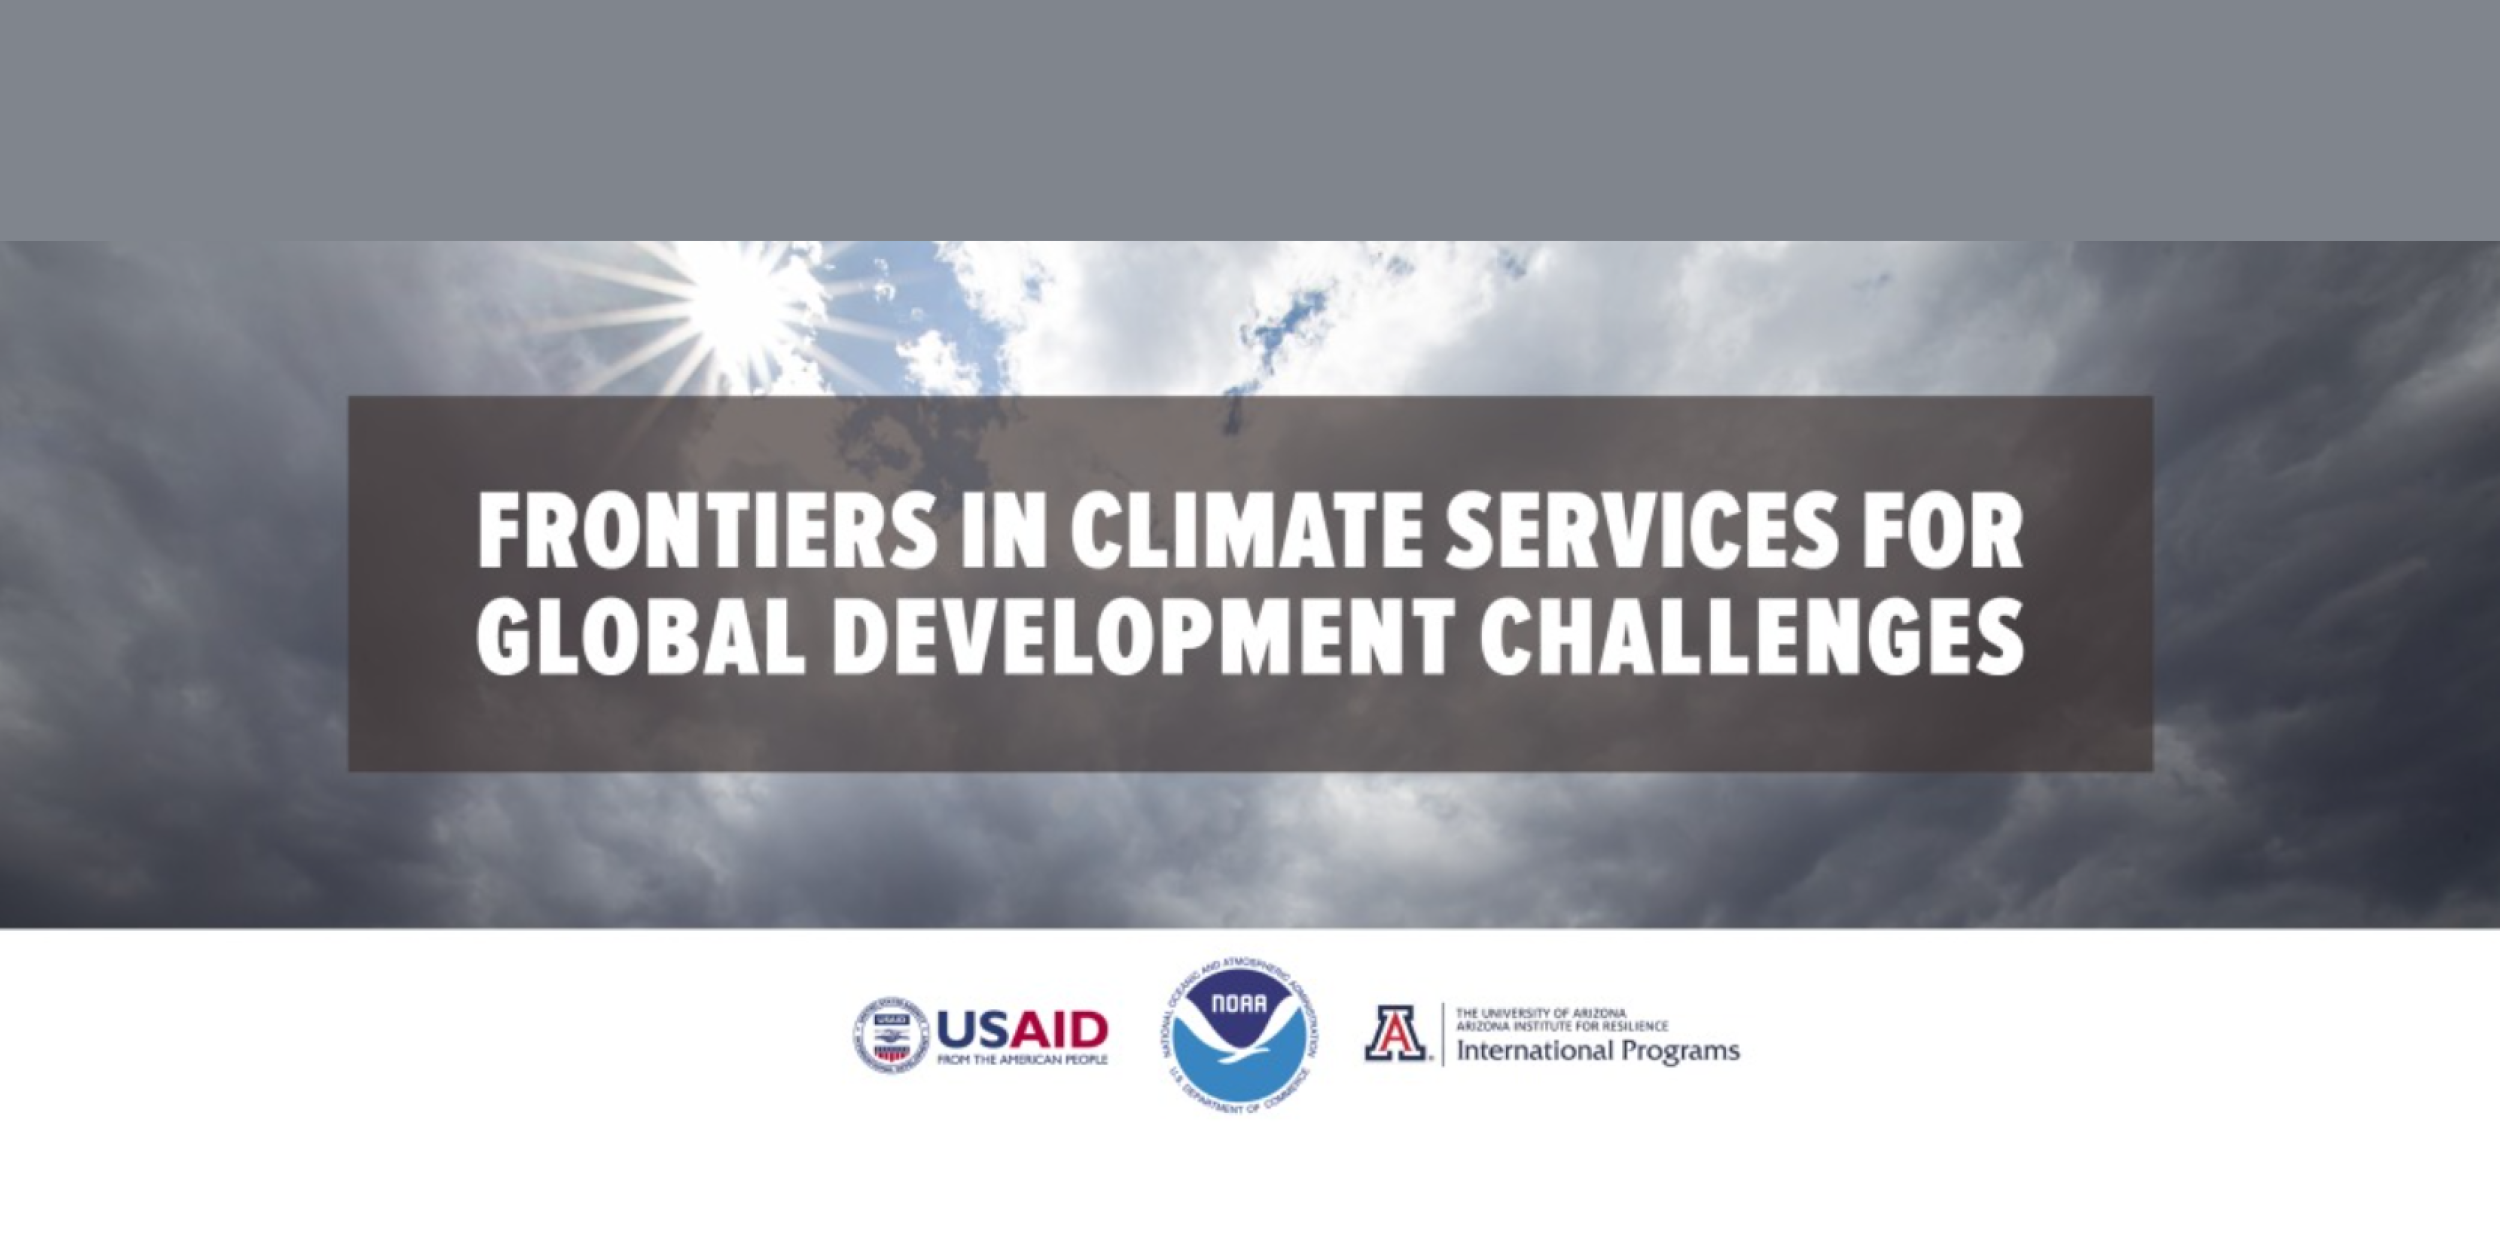 Title of webinar series in front of cloudy sky with NOAA, University of Arizona, and USAID logos below. Image credit: University of Arizona